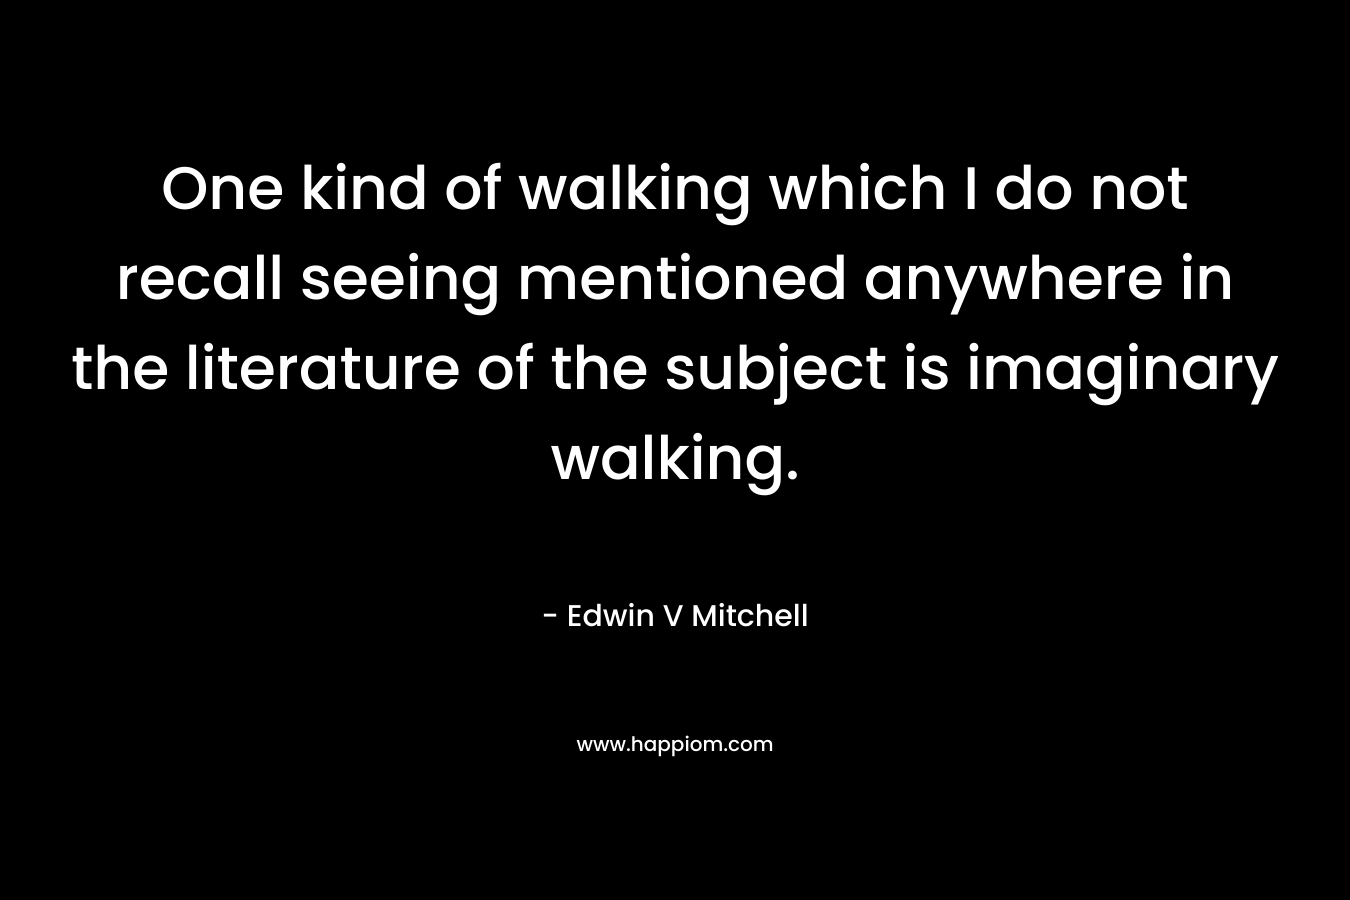 One kind of walking which I do not recall seeing mentioned anywhere in the literature of the subject is imaginary walking. – Edwin V Mitchell